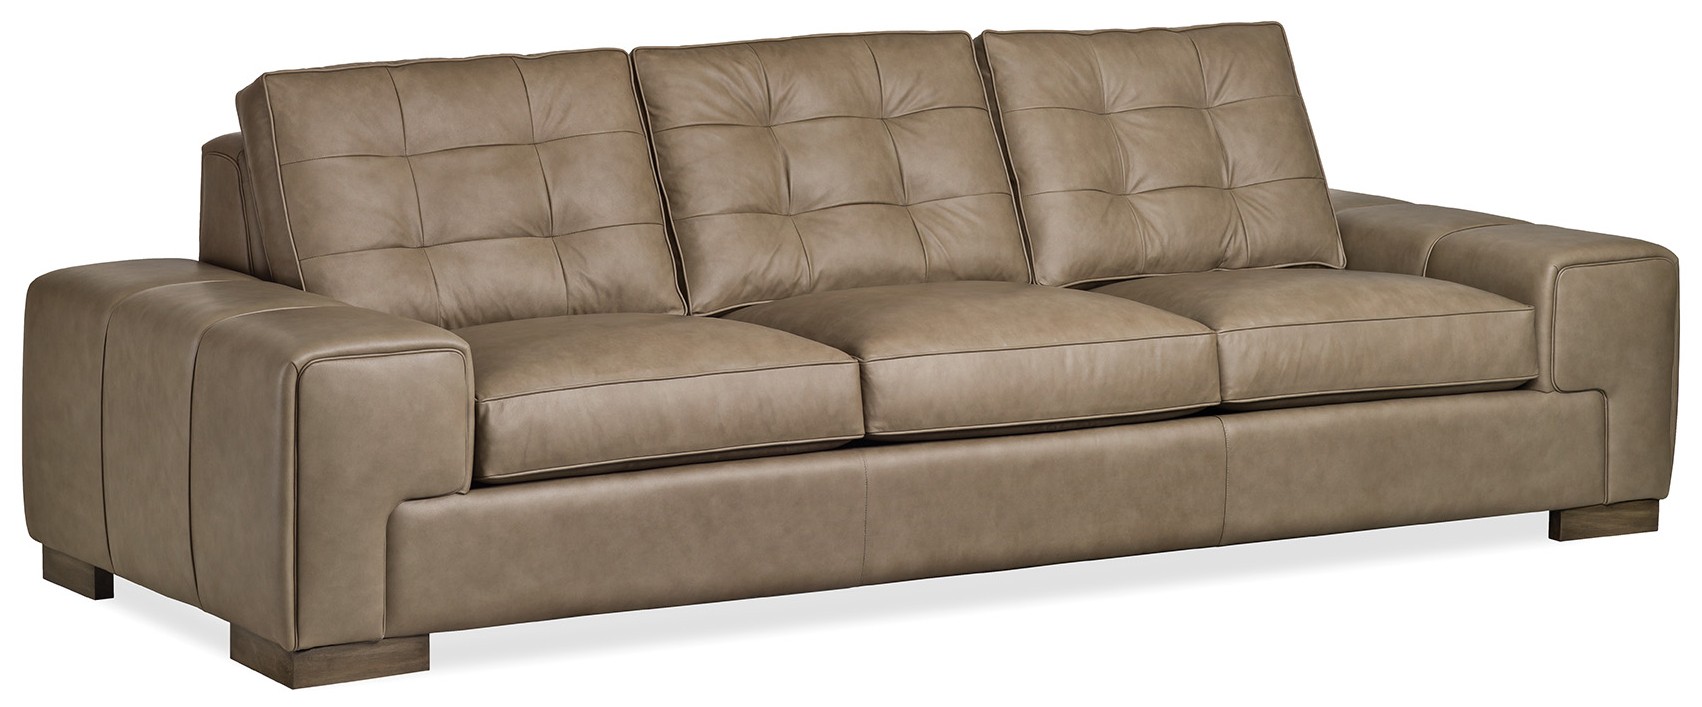 Modern sofa in lux leather